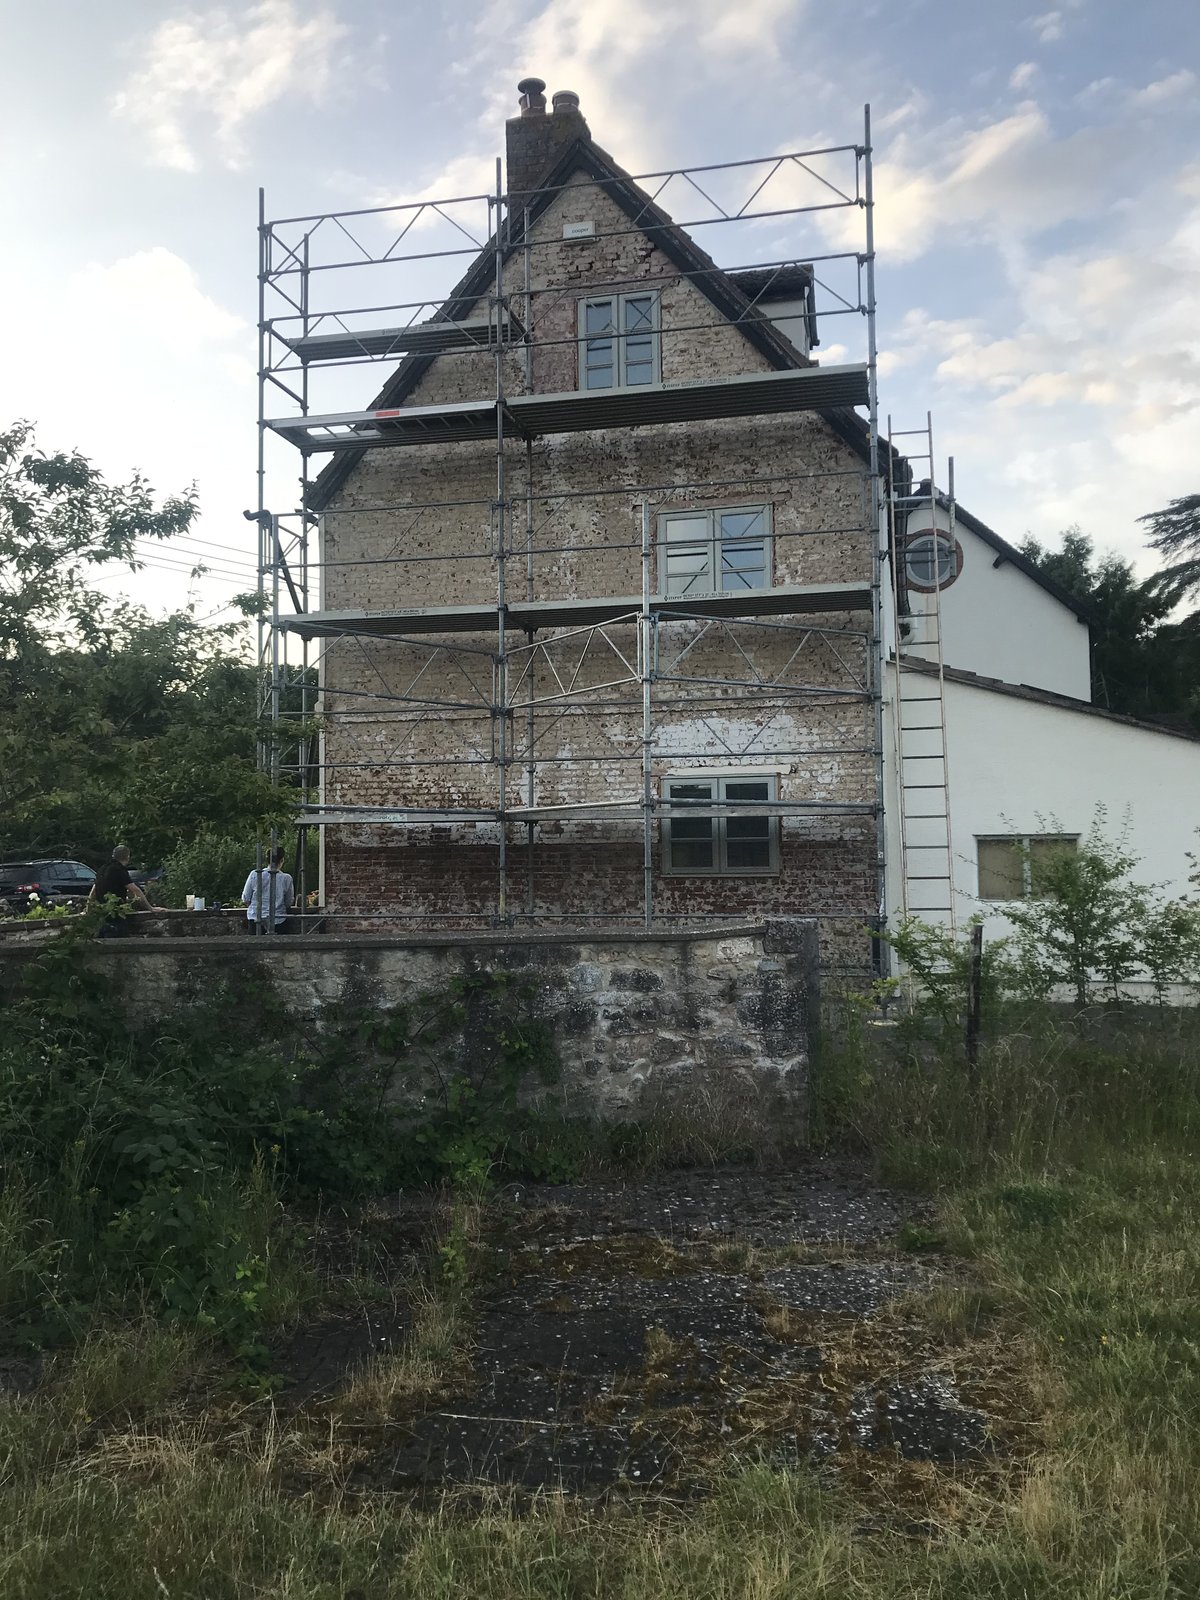 An image of llanishen cottage paint removal before 002 goes here.